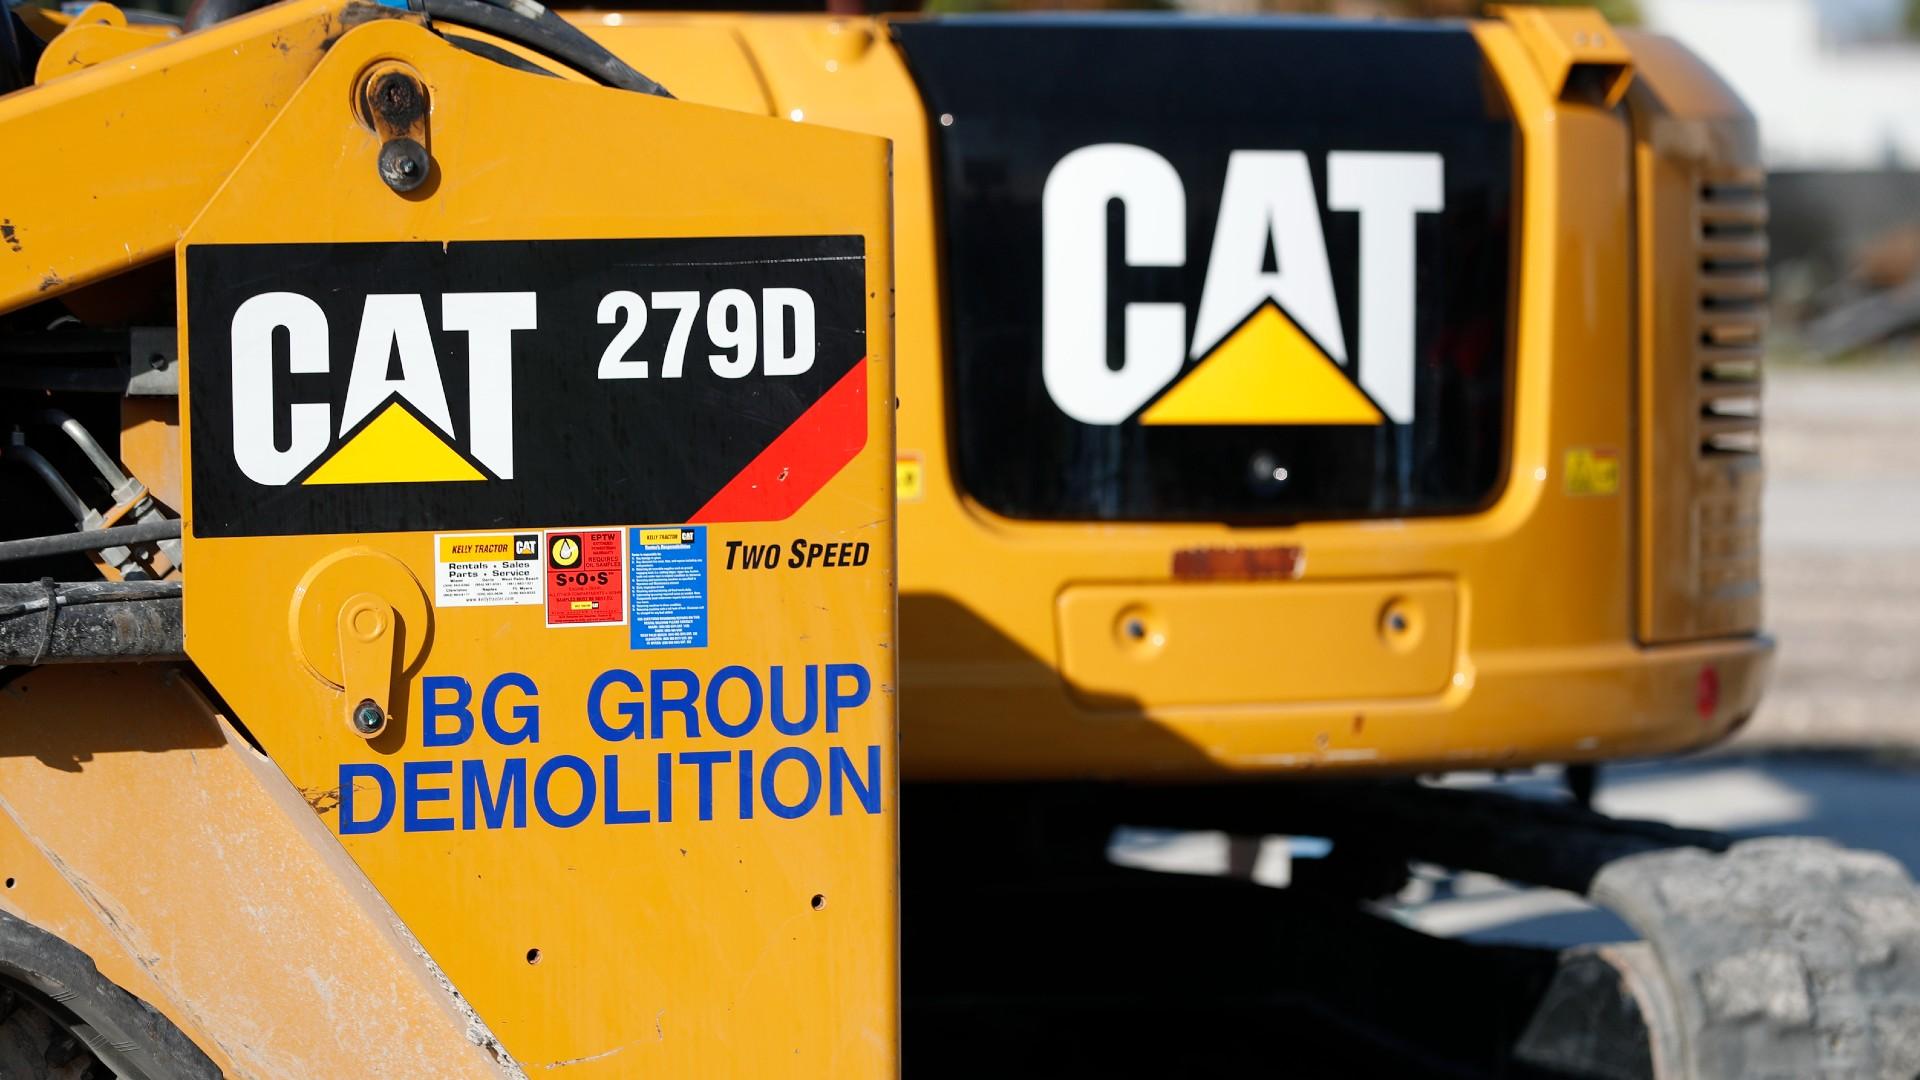 This May 8, 2019 photo shows a Caterpillar 279D Compact Track Loader, left, and 308E2 CR Mini Hydraulic Excavator, right, rear, at a demolition site in Fort Lauderdale, Fla. (AP Photo / Wilfredo Lee, File)